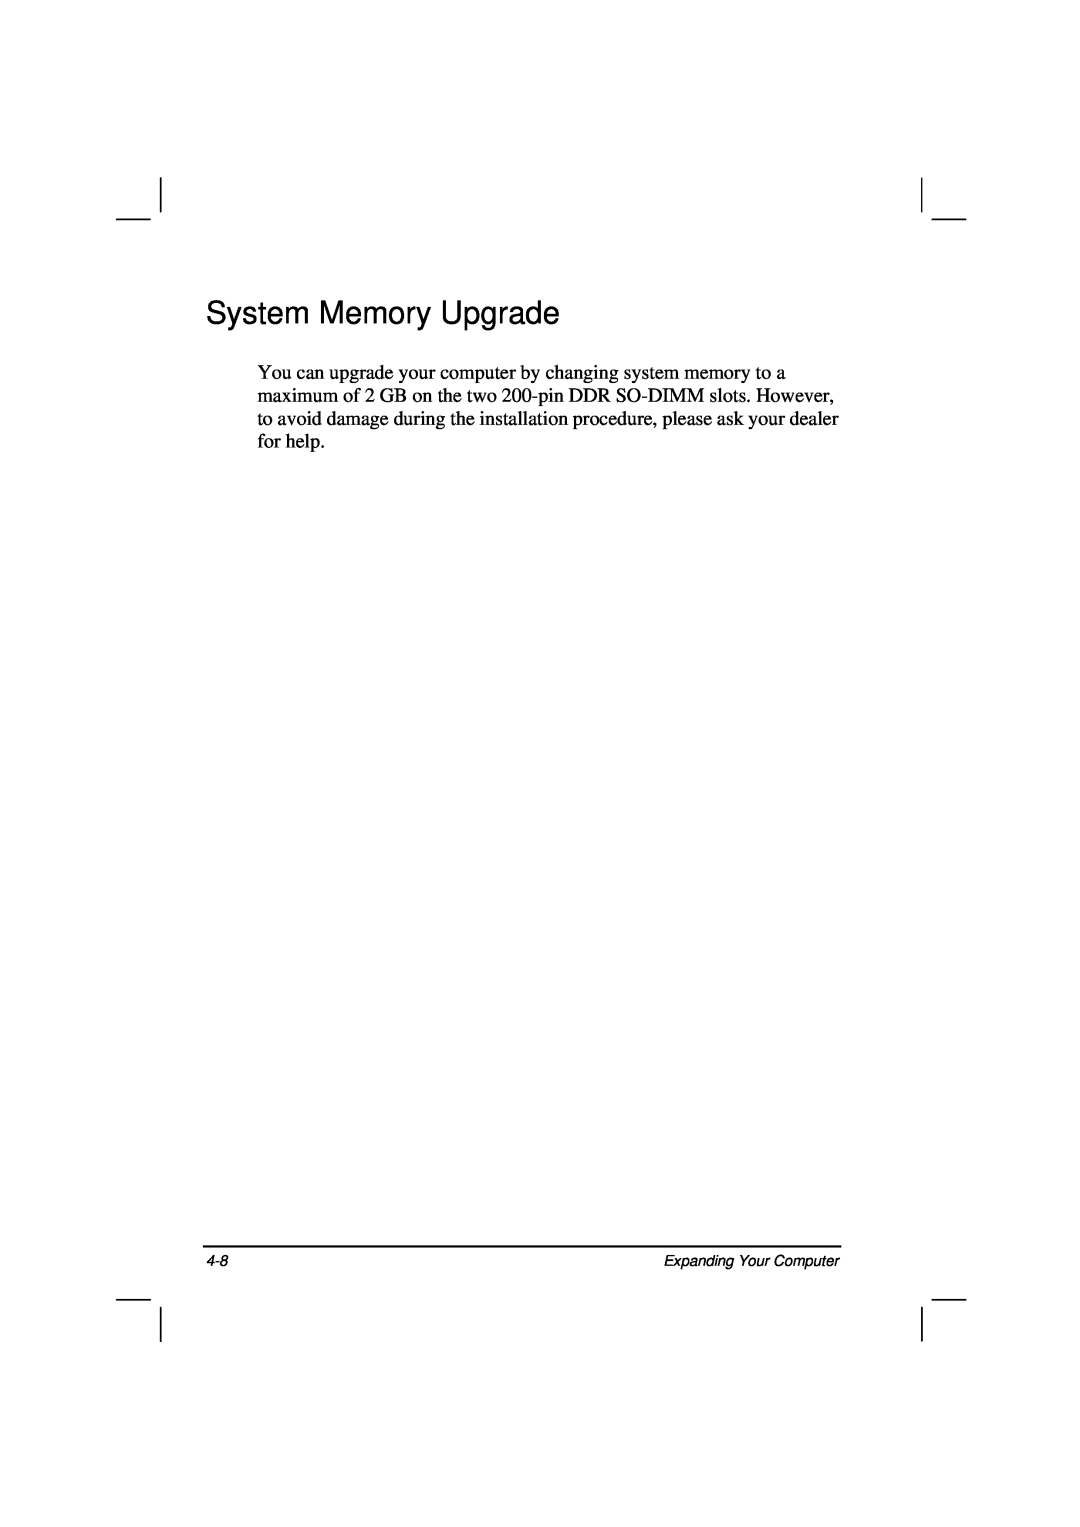 Casio HK1223 owner manual System Memory Upgrade, Expanding Your Computer 